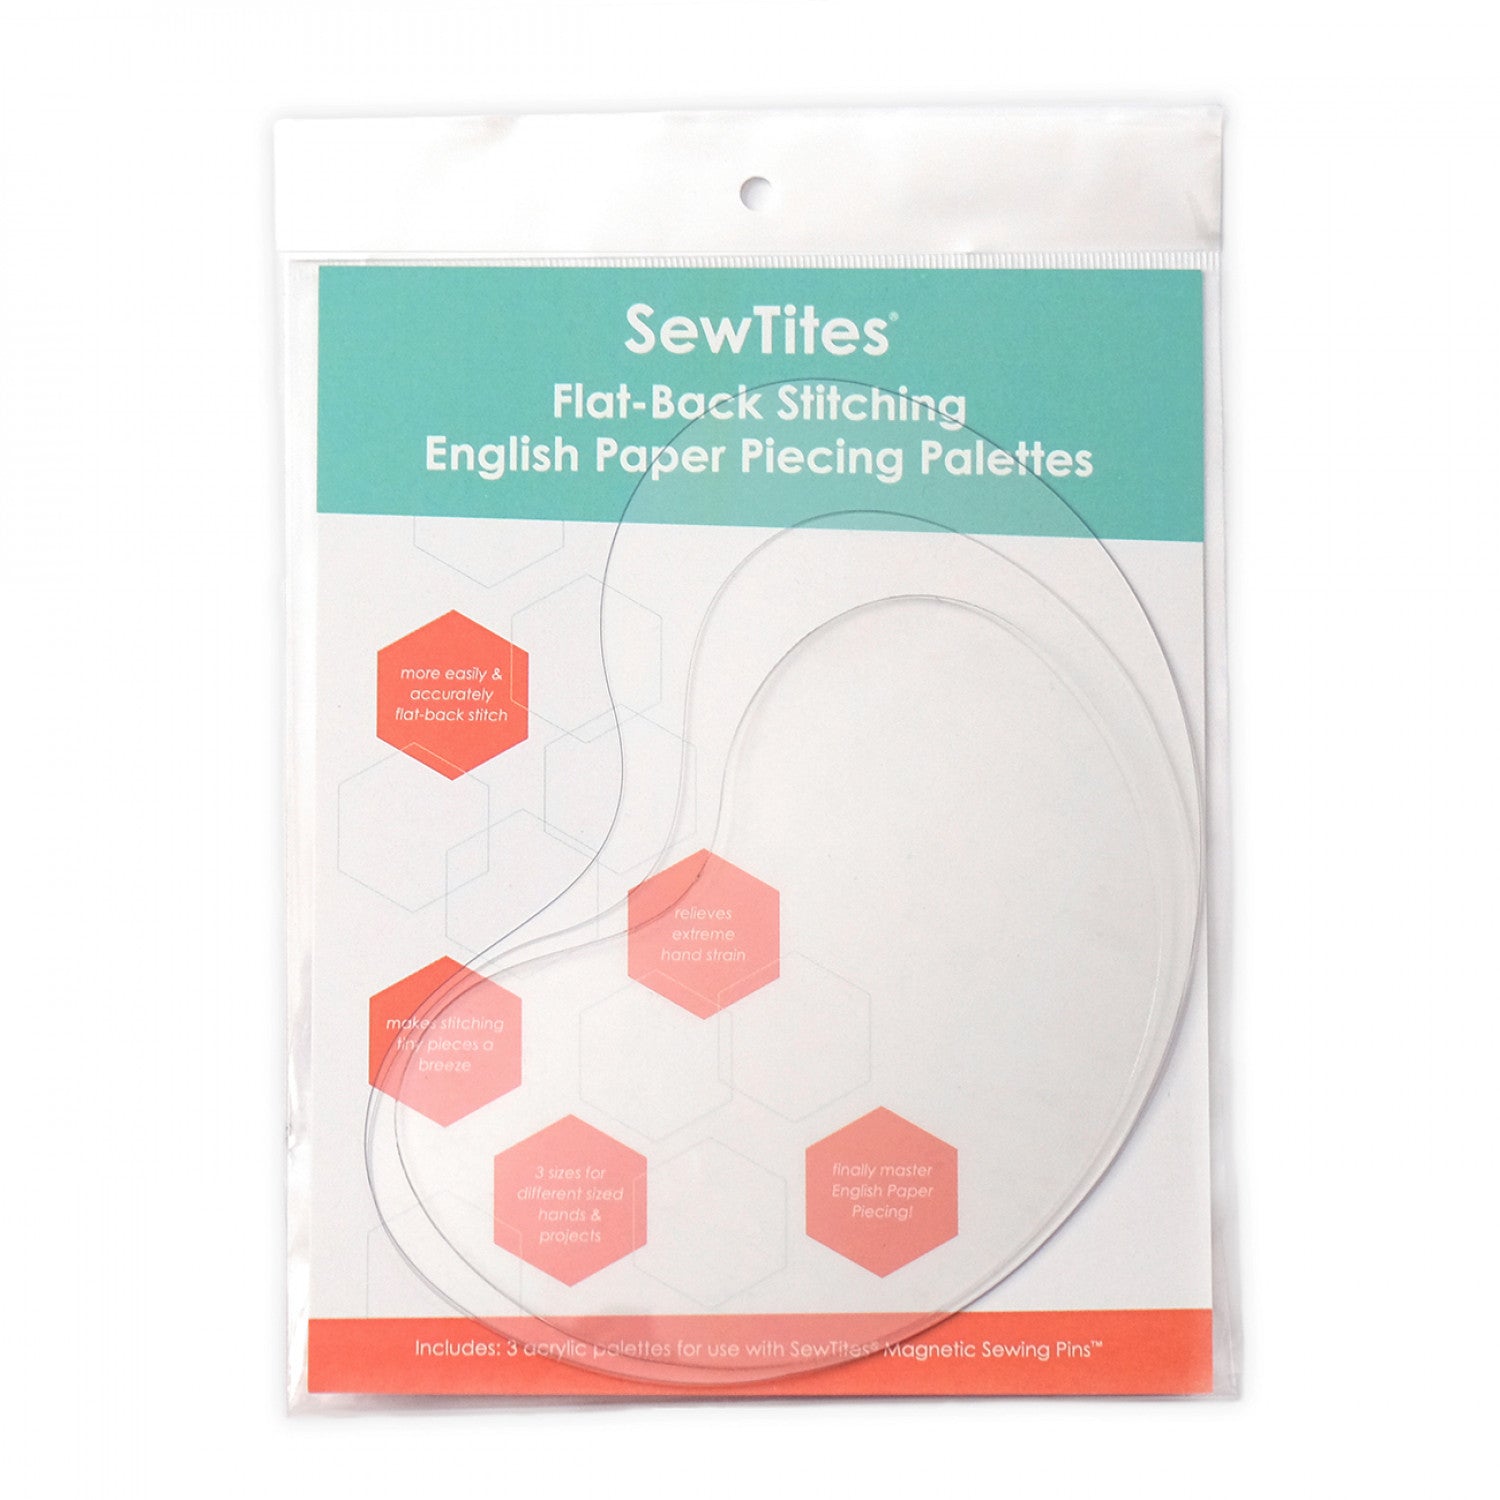 English Paper Piecing Palette from SewTites